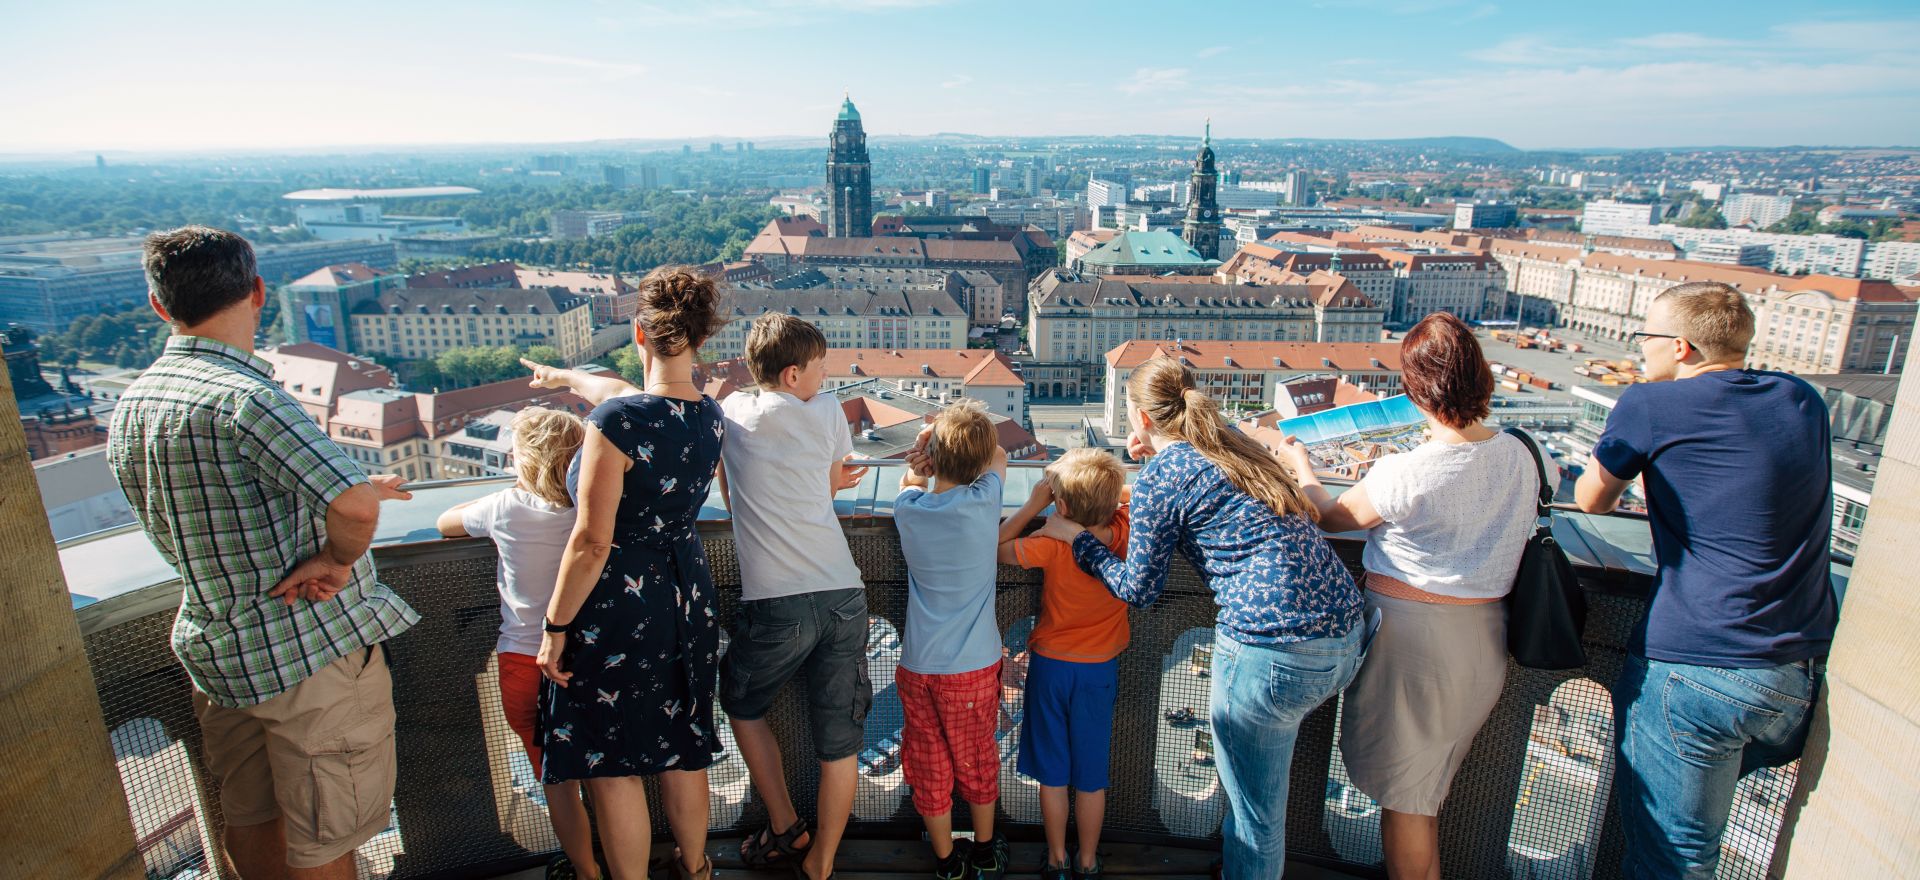 Visitors stand on the observation deck of the Frauenkirche dome and enjoy the view over Dresden.